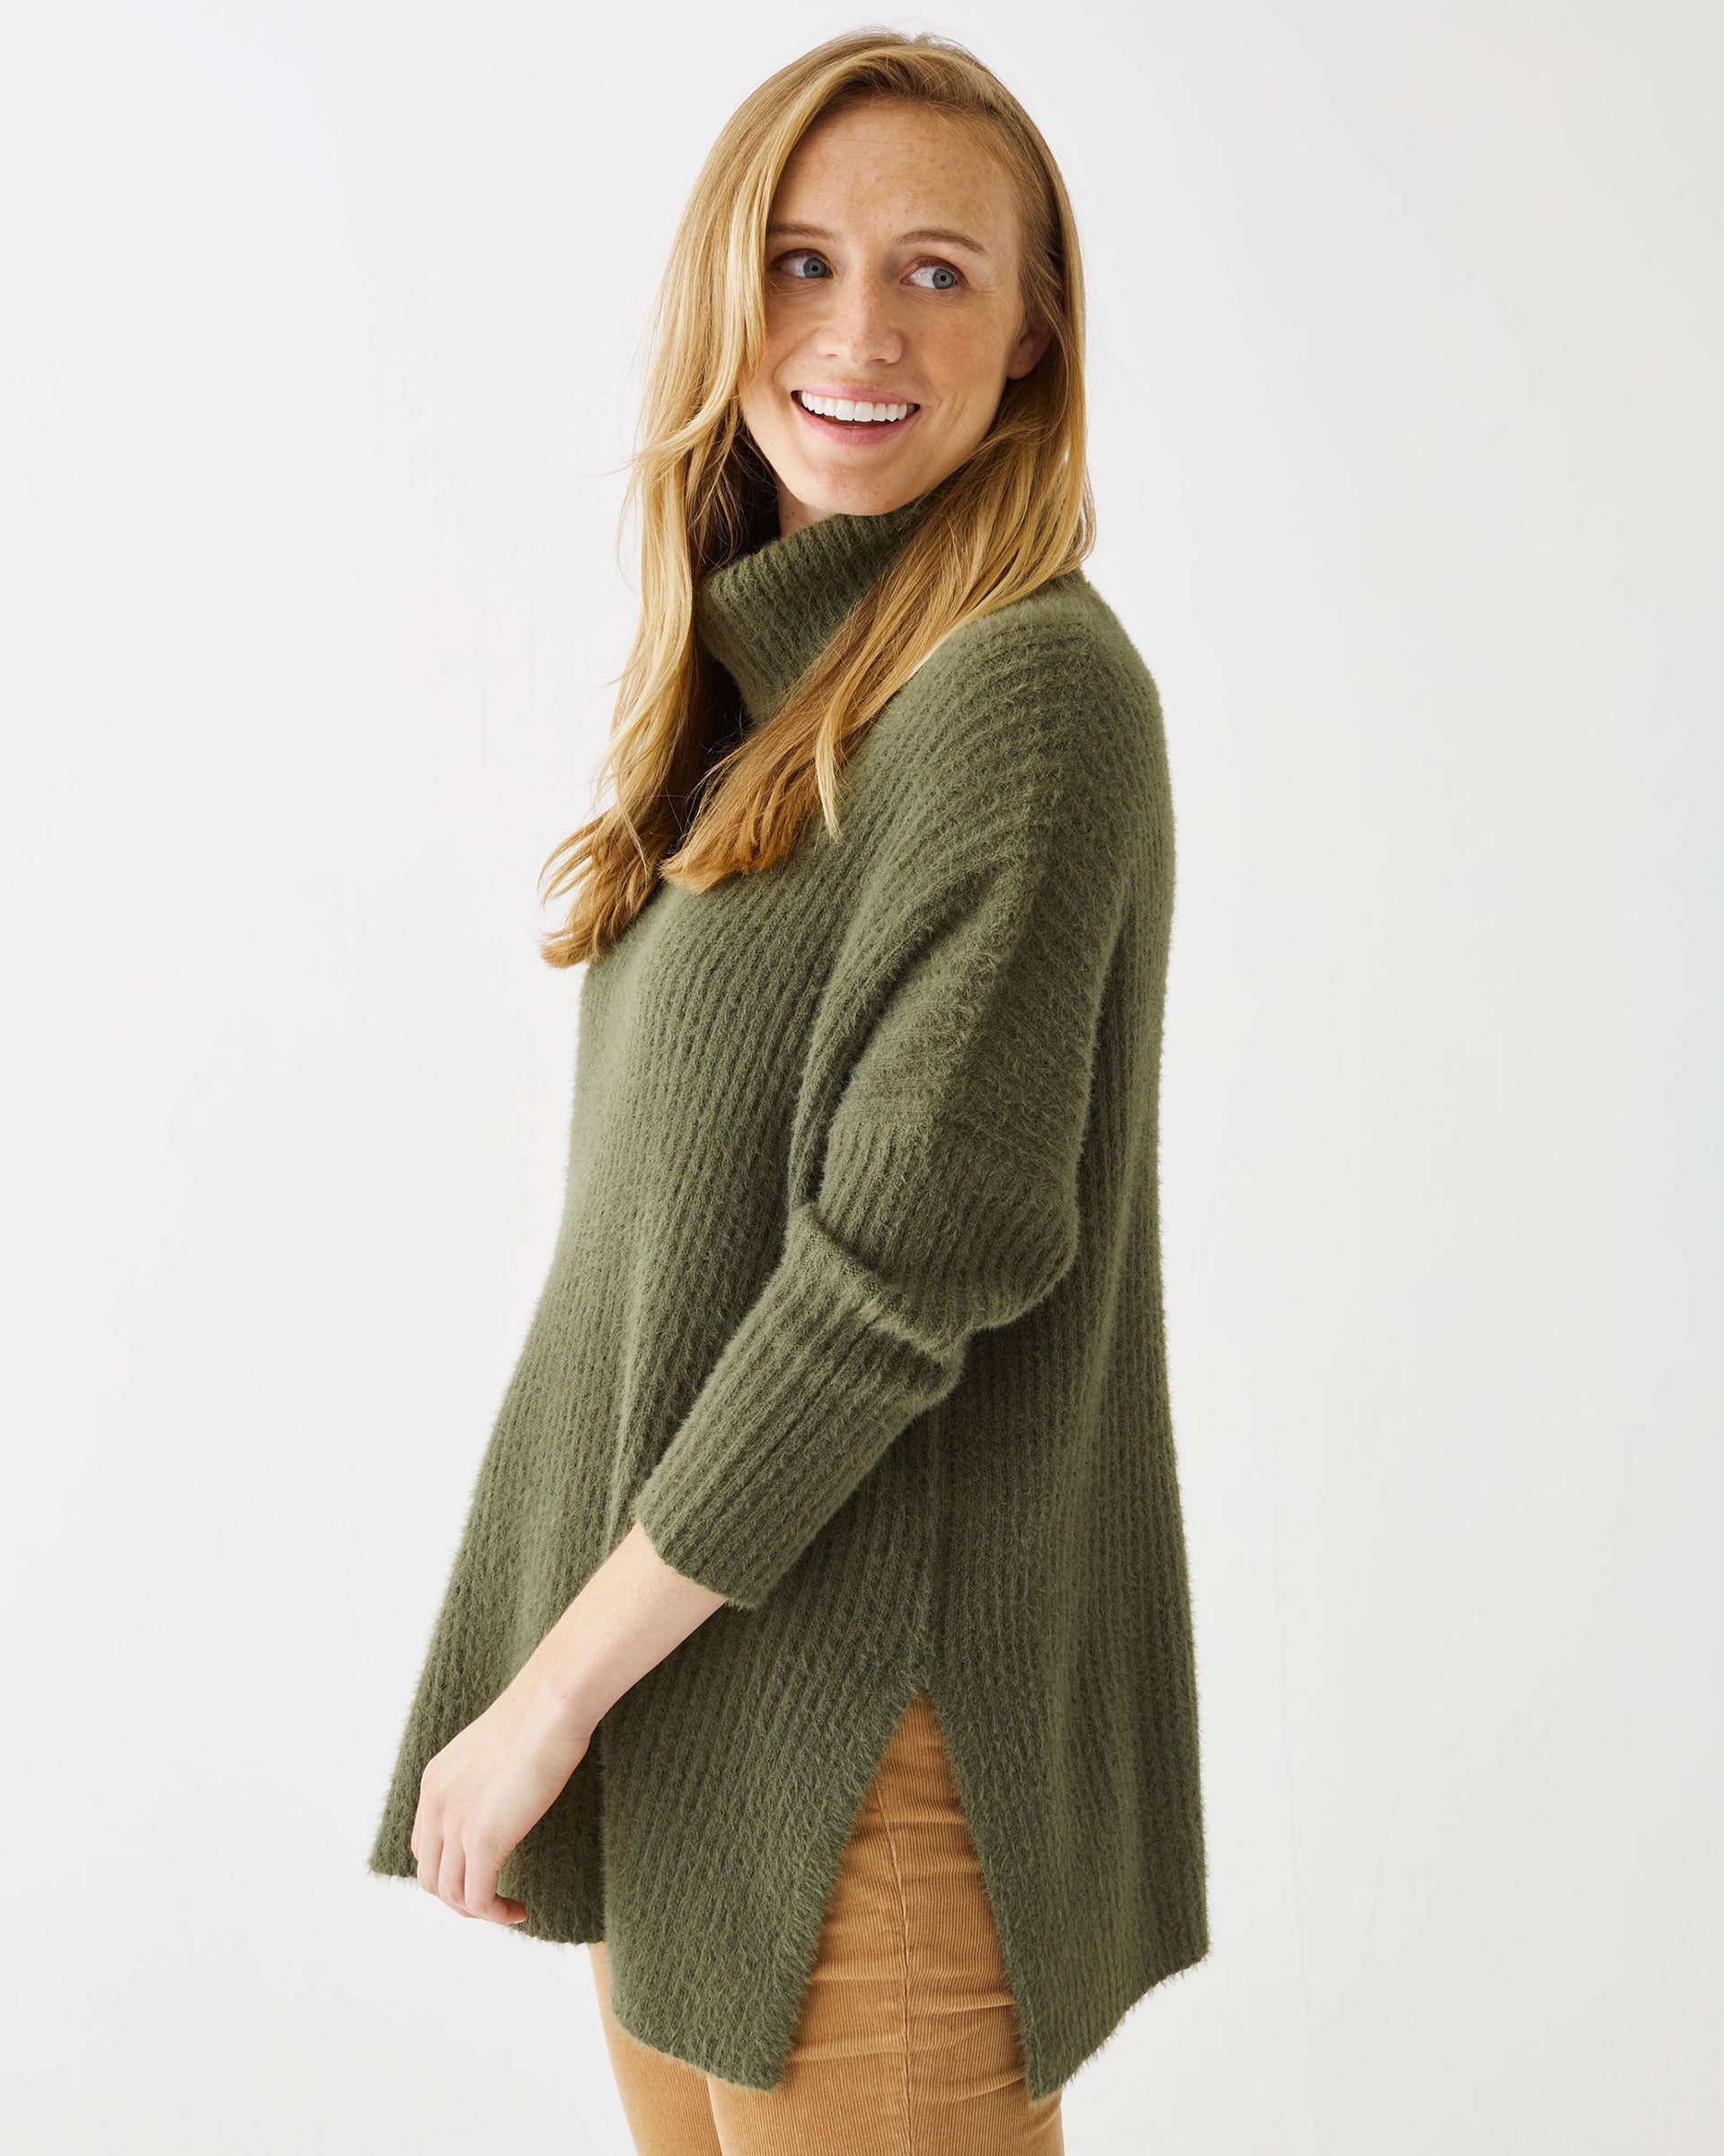 Female wearing a olive green turtleneck sweater with split sides in front of white wall